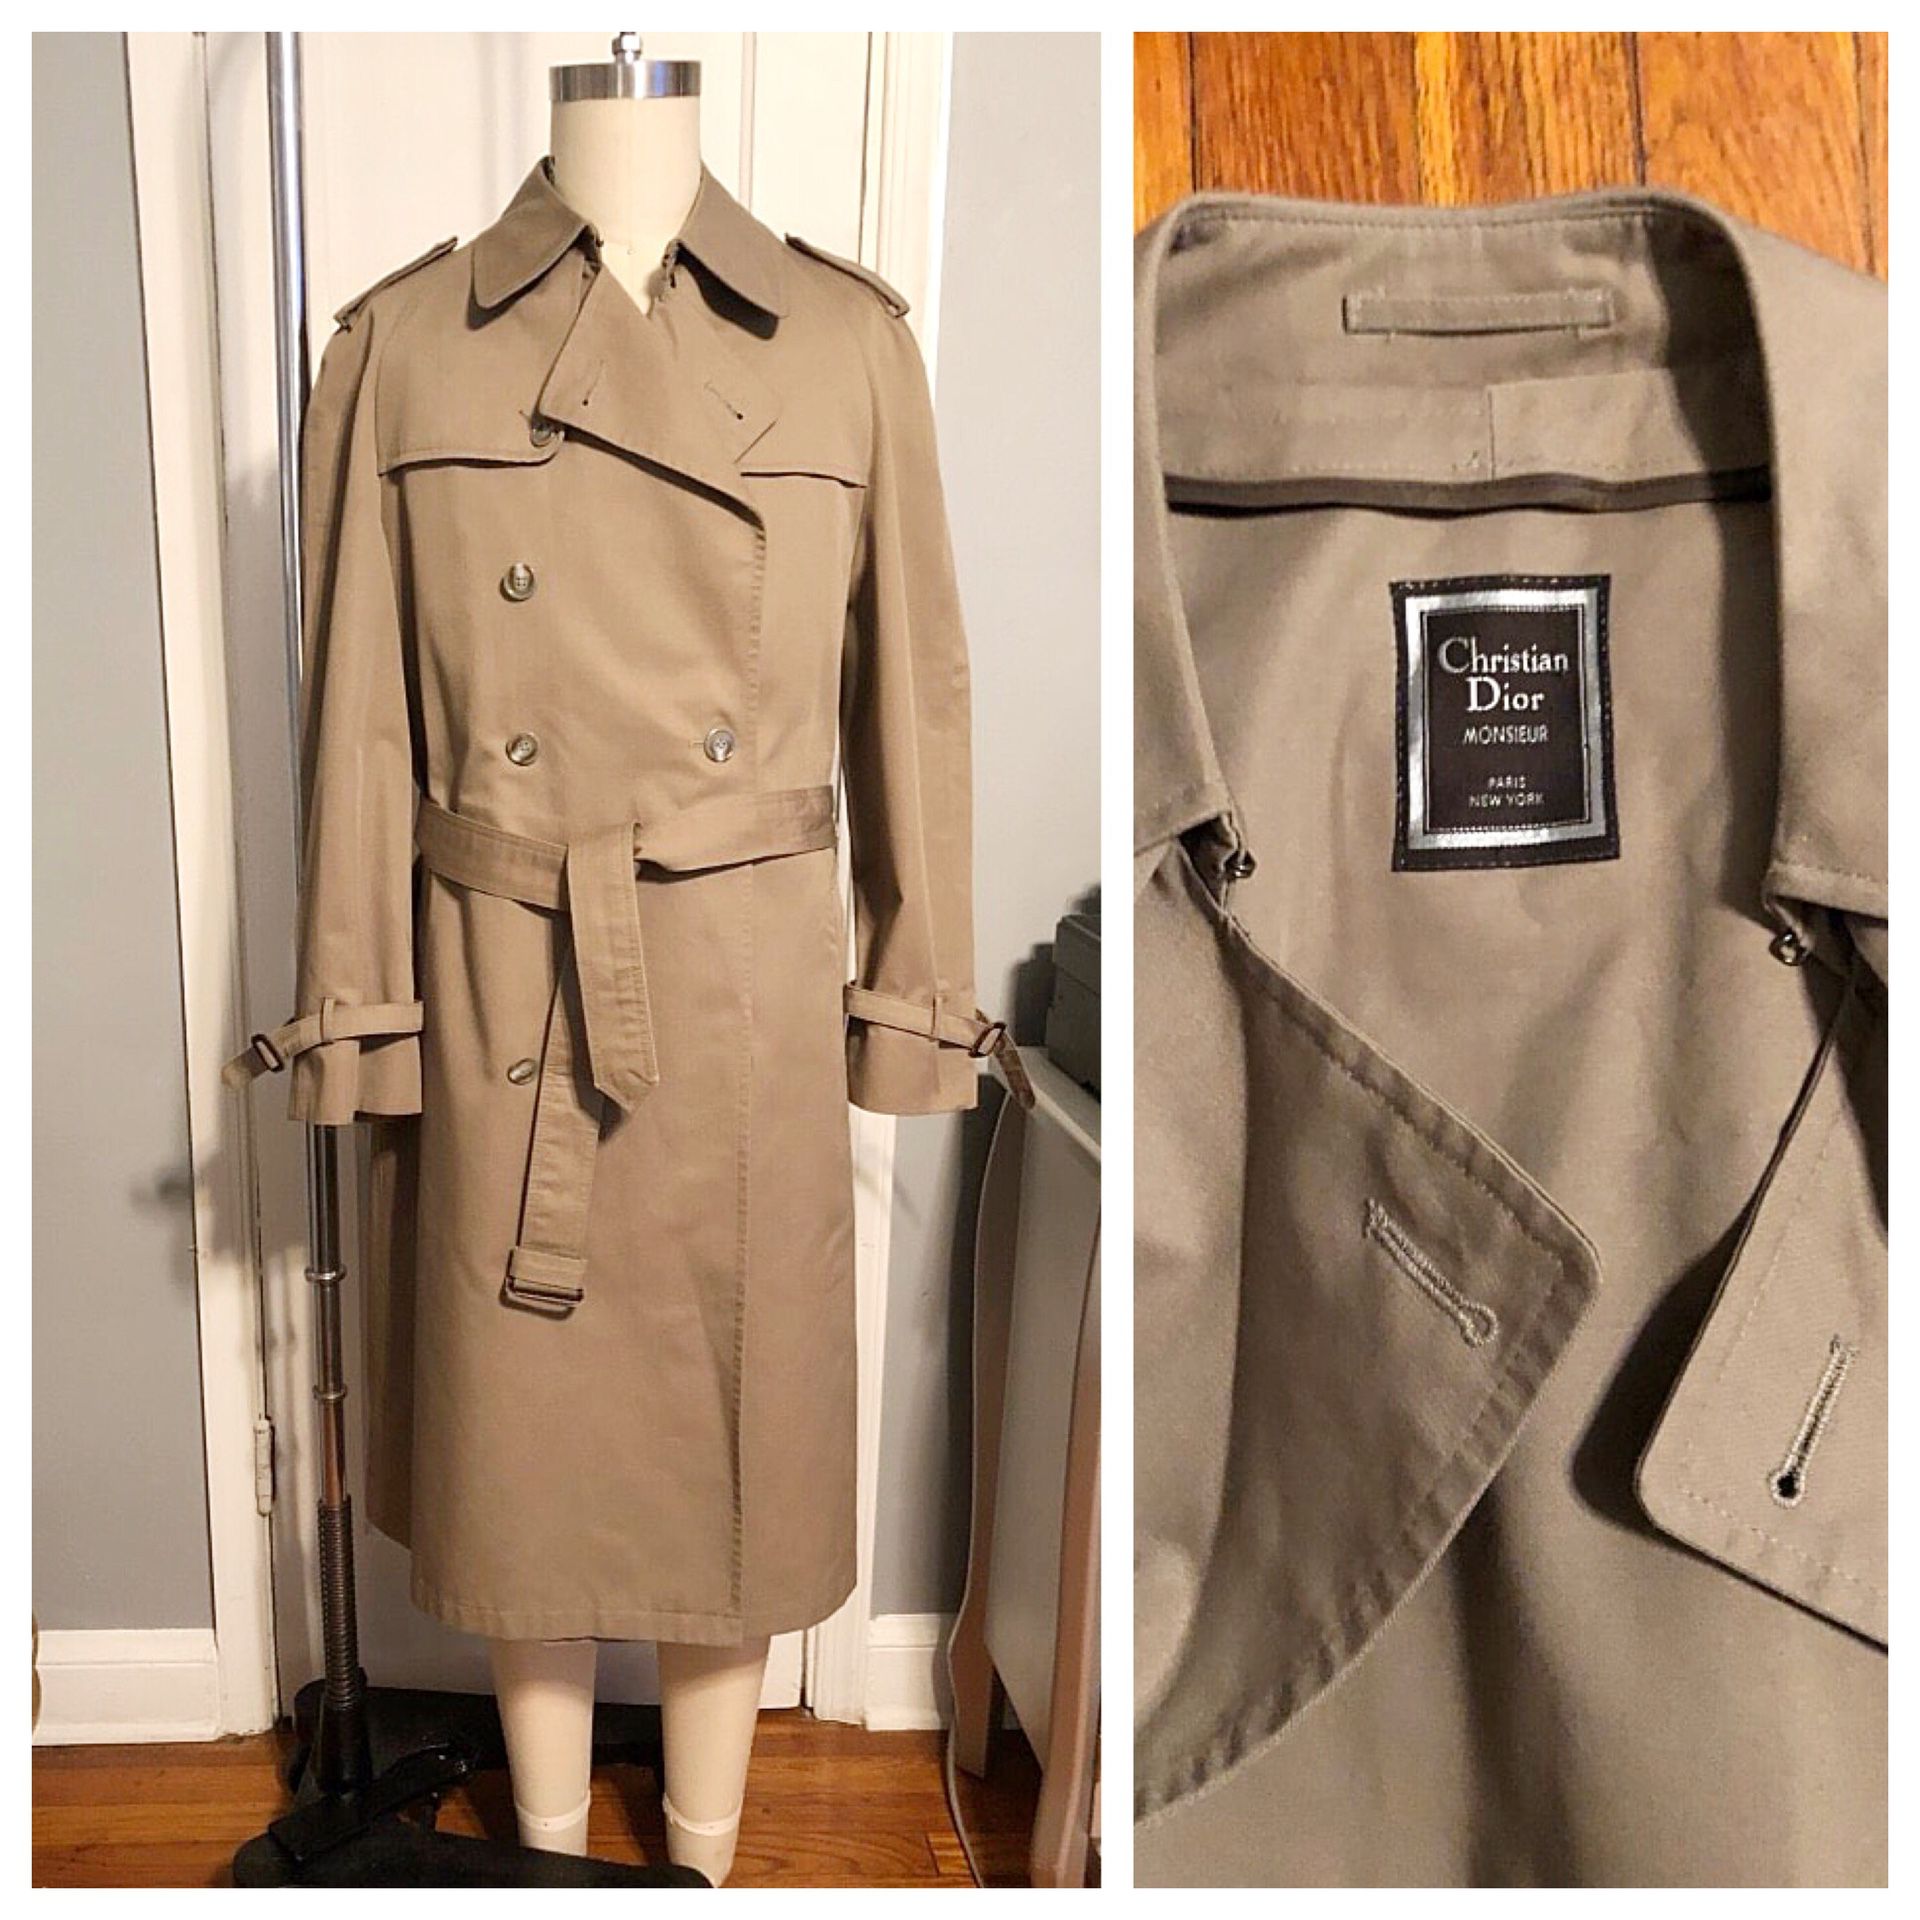 Men’s Christian Dior vintage trench coat paid $1,800. Size 42 regular (large size) excellent condition